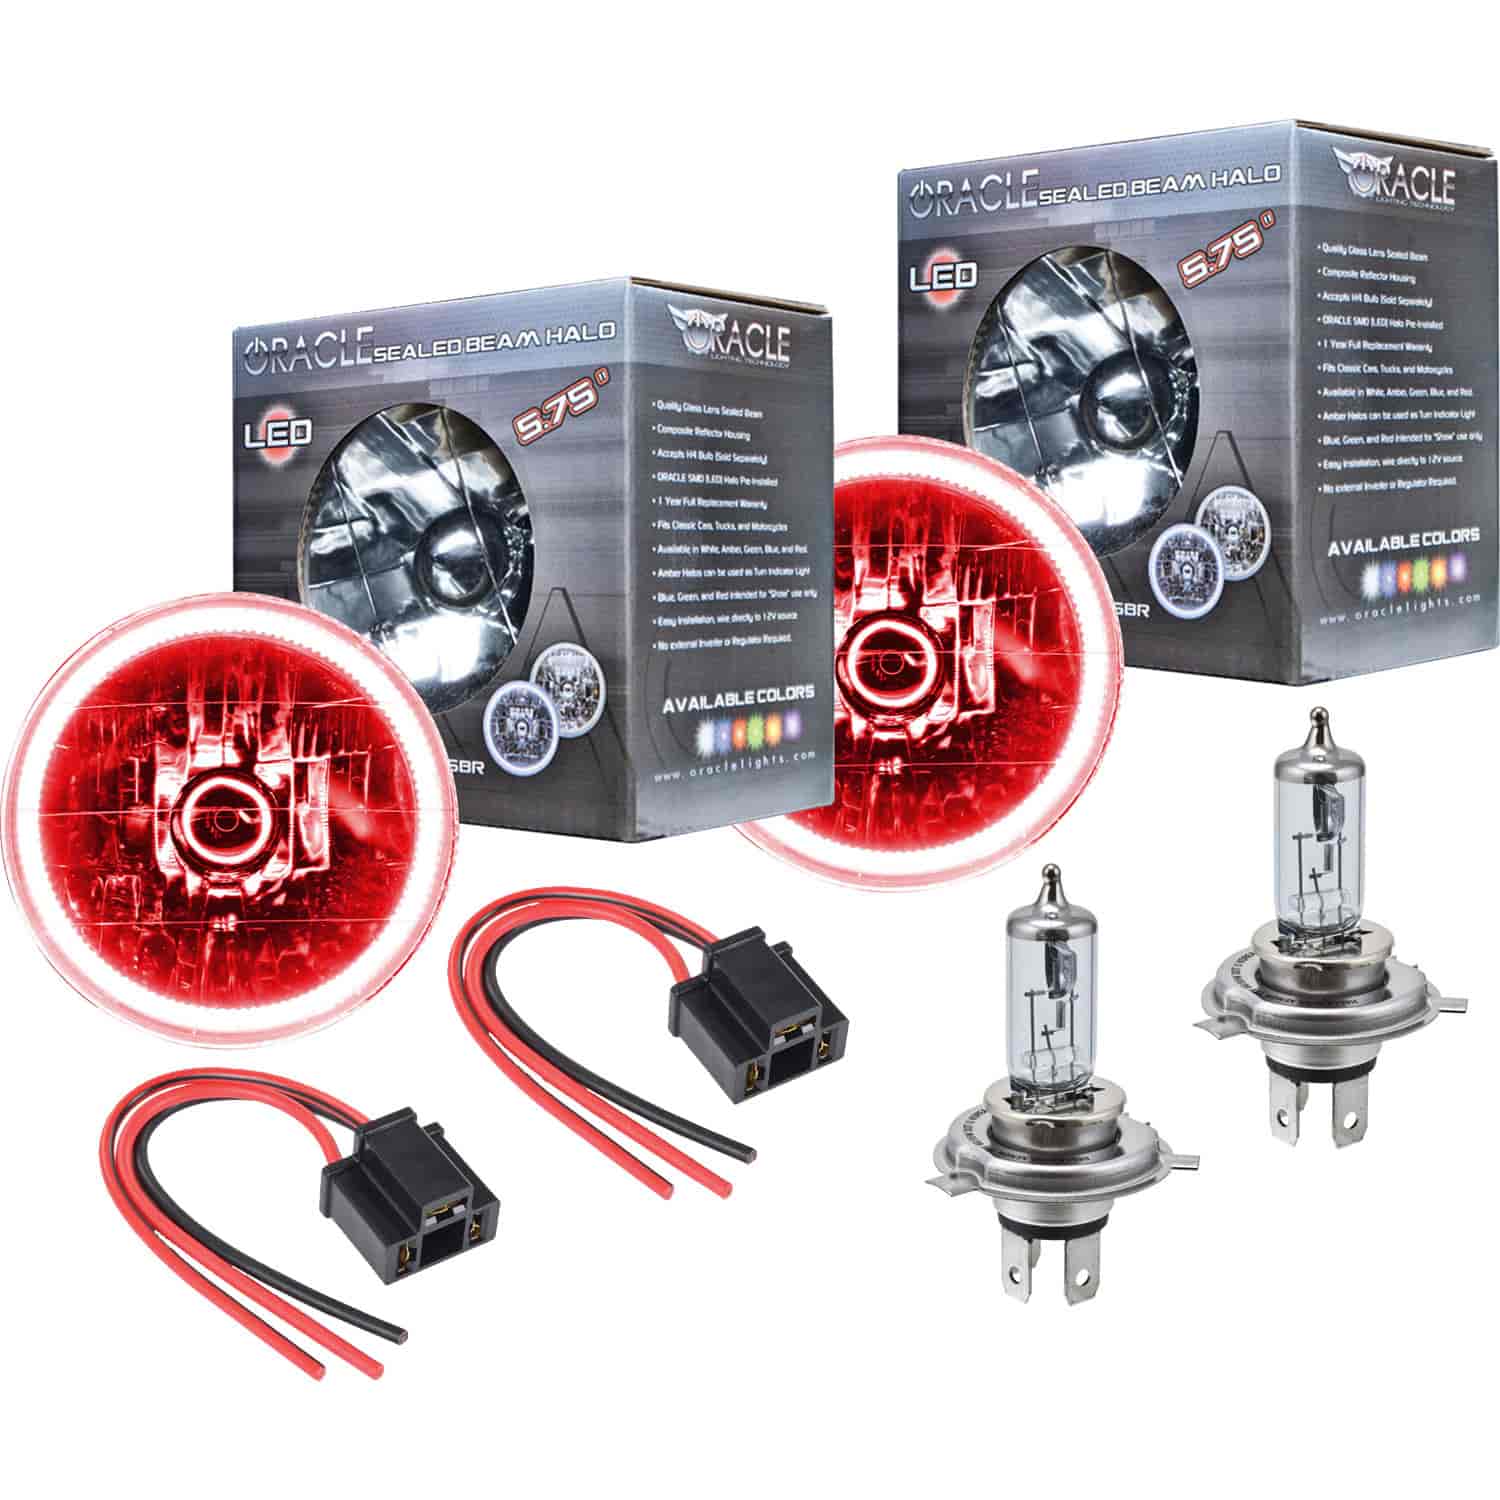 5.75" H4 Headlight Conversion Kit Red LED Halo Includes